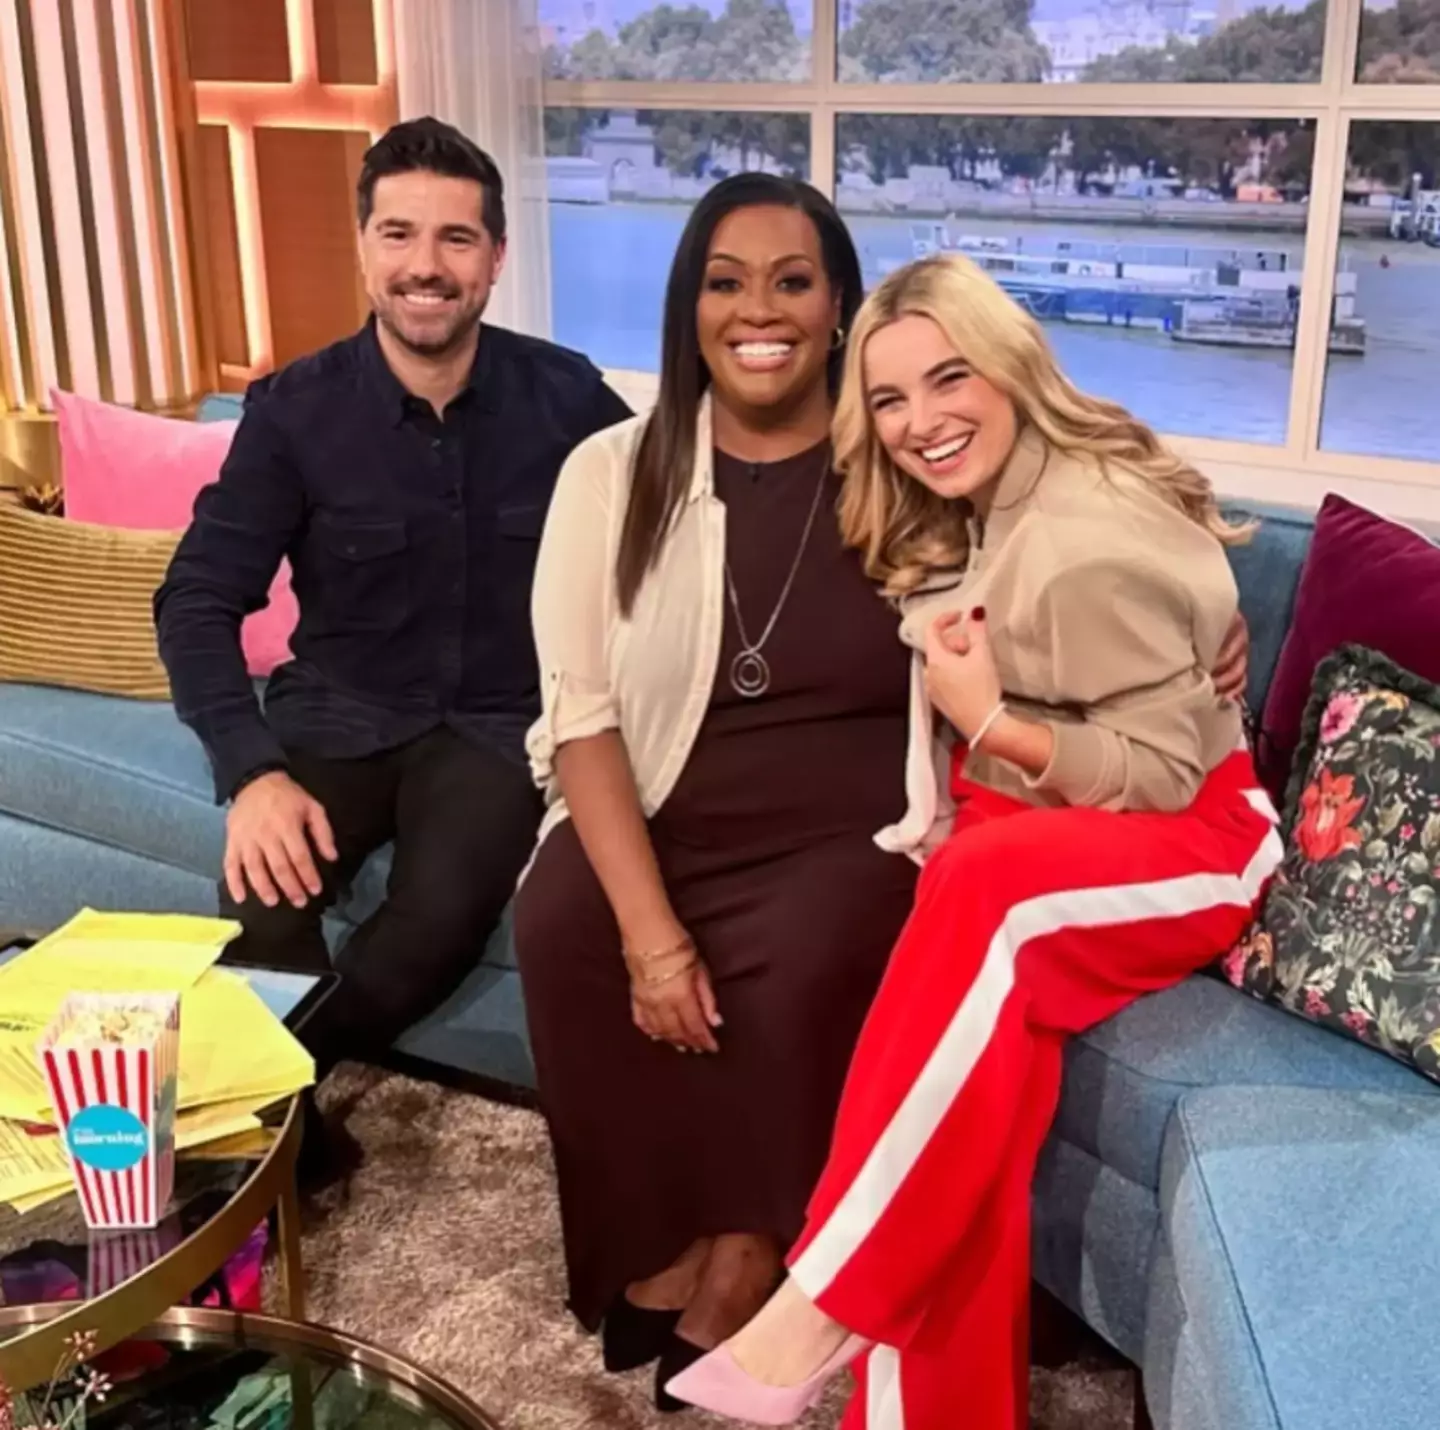 Sian Welby on This Morning. (Instagram/@sianwelby)